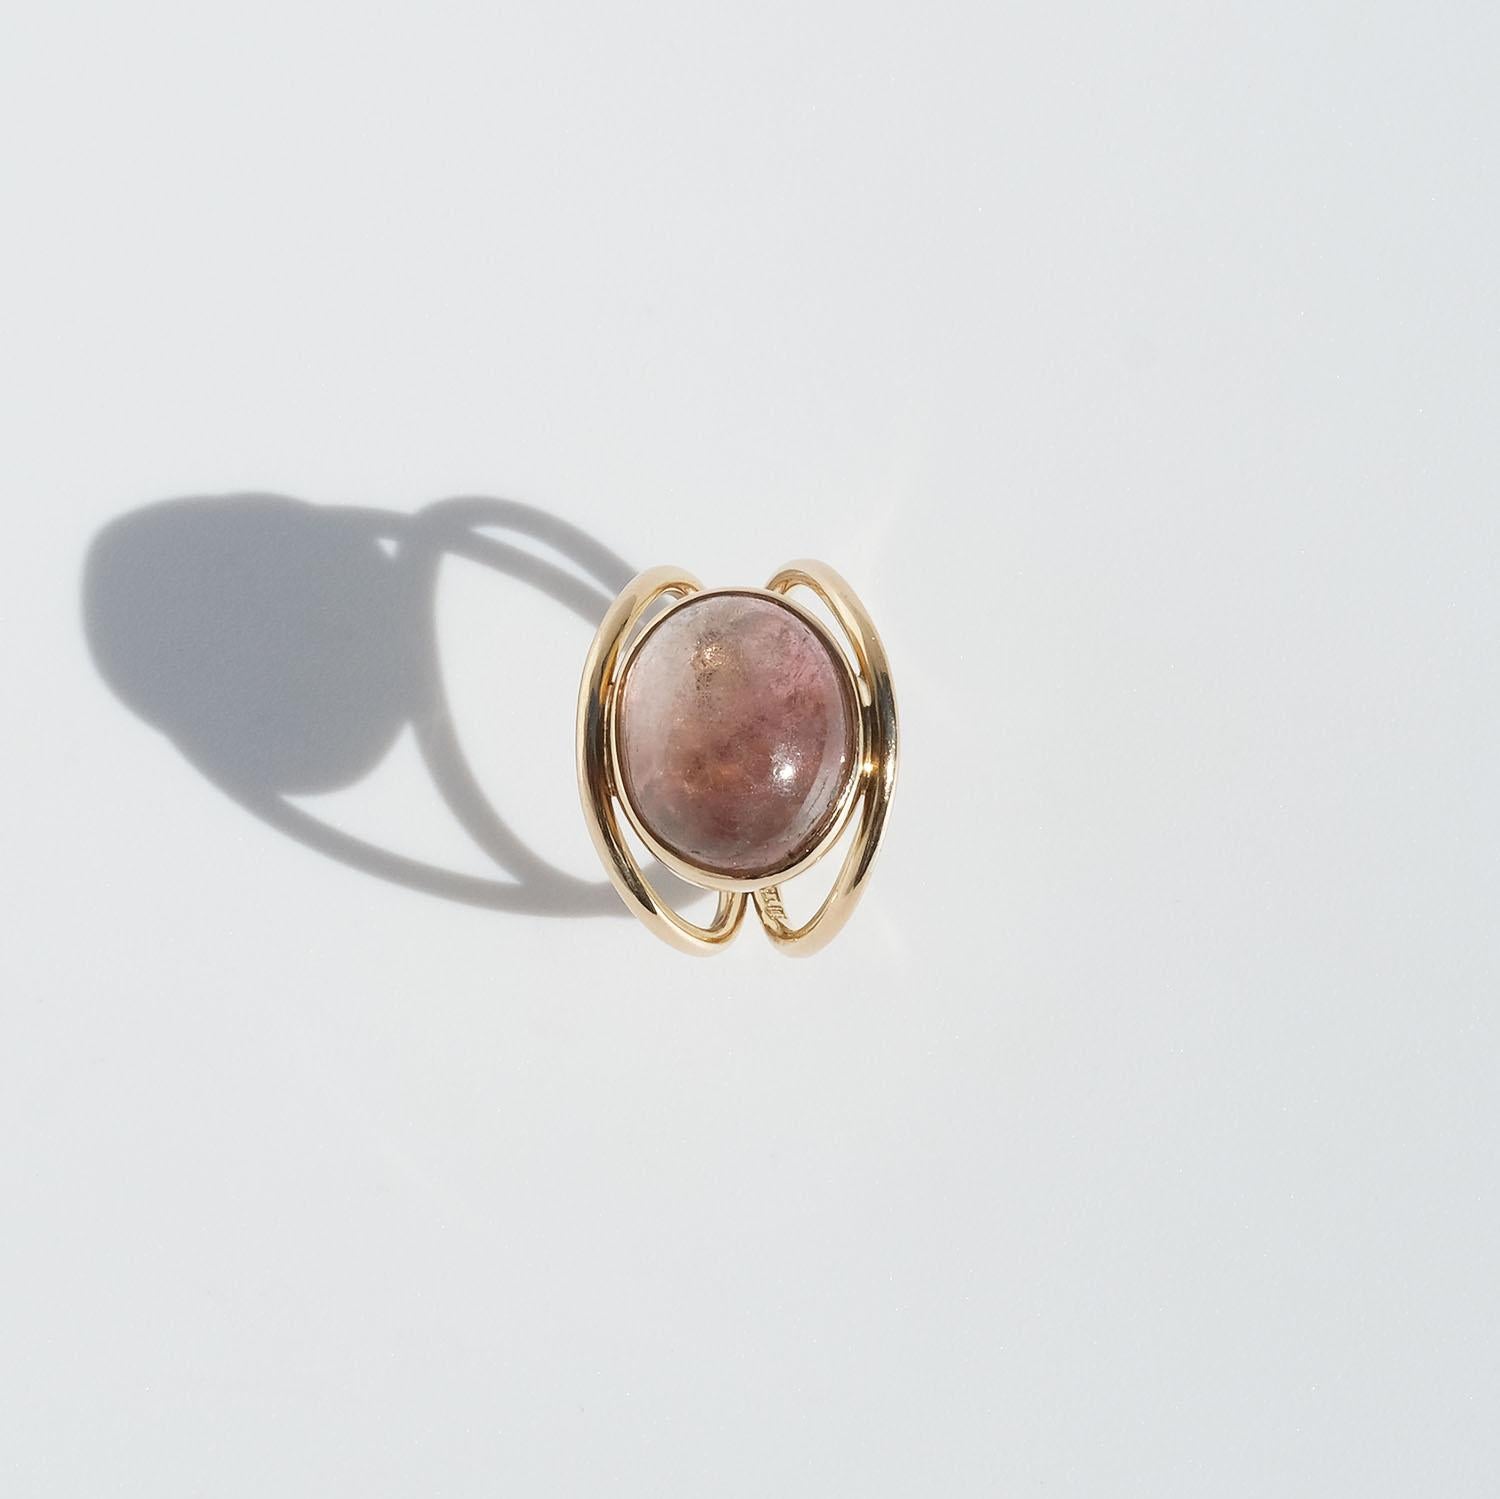 Vintage 18k Gold and Pink Tourmaline Ring by Swedish Master Rey Urban Year 1961 For Sale 2